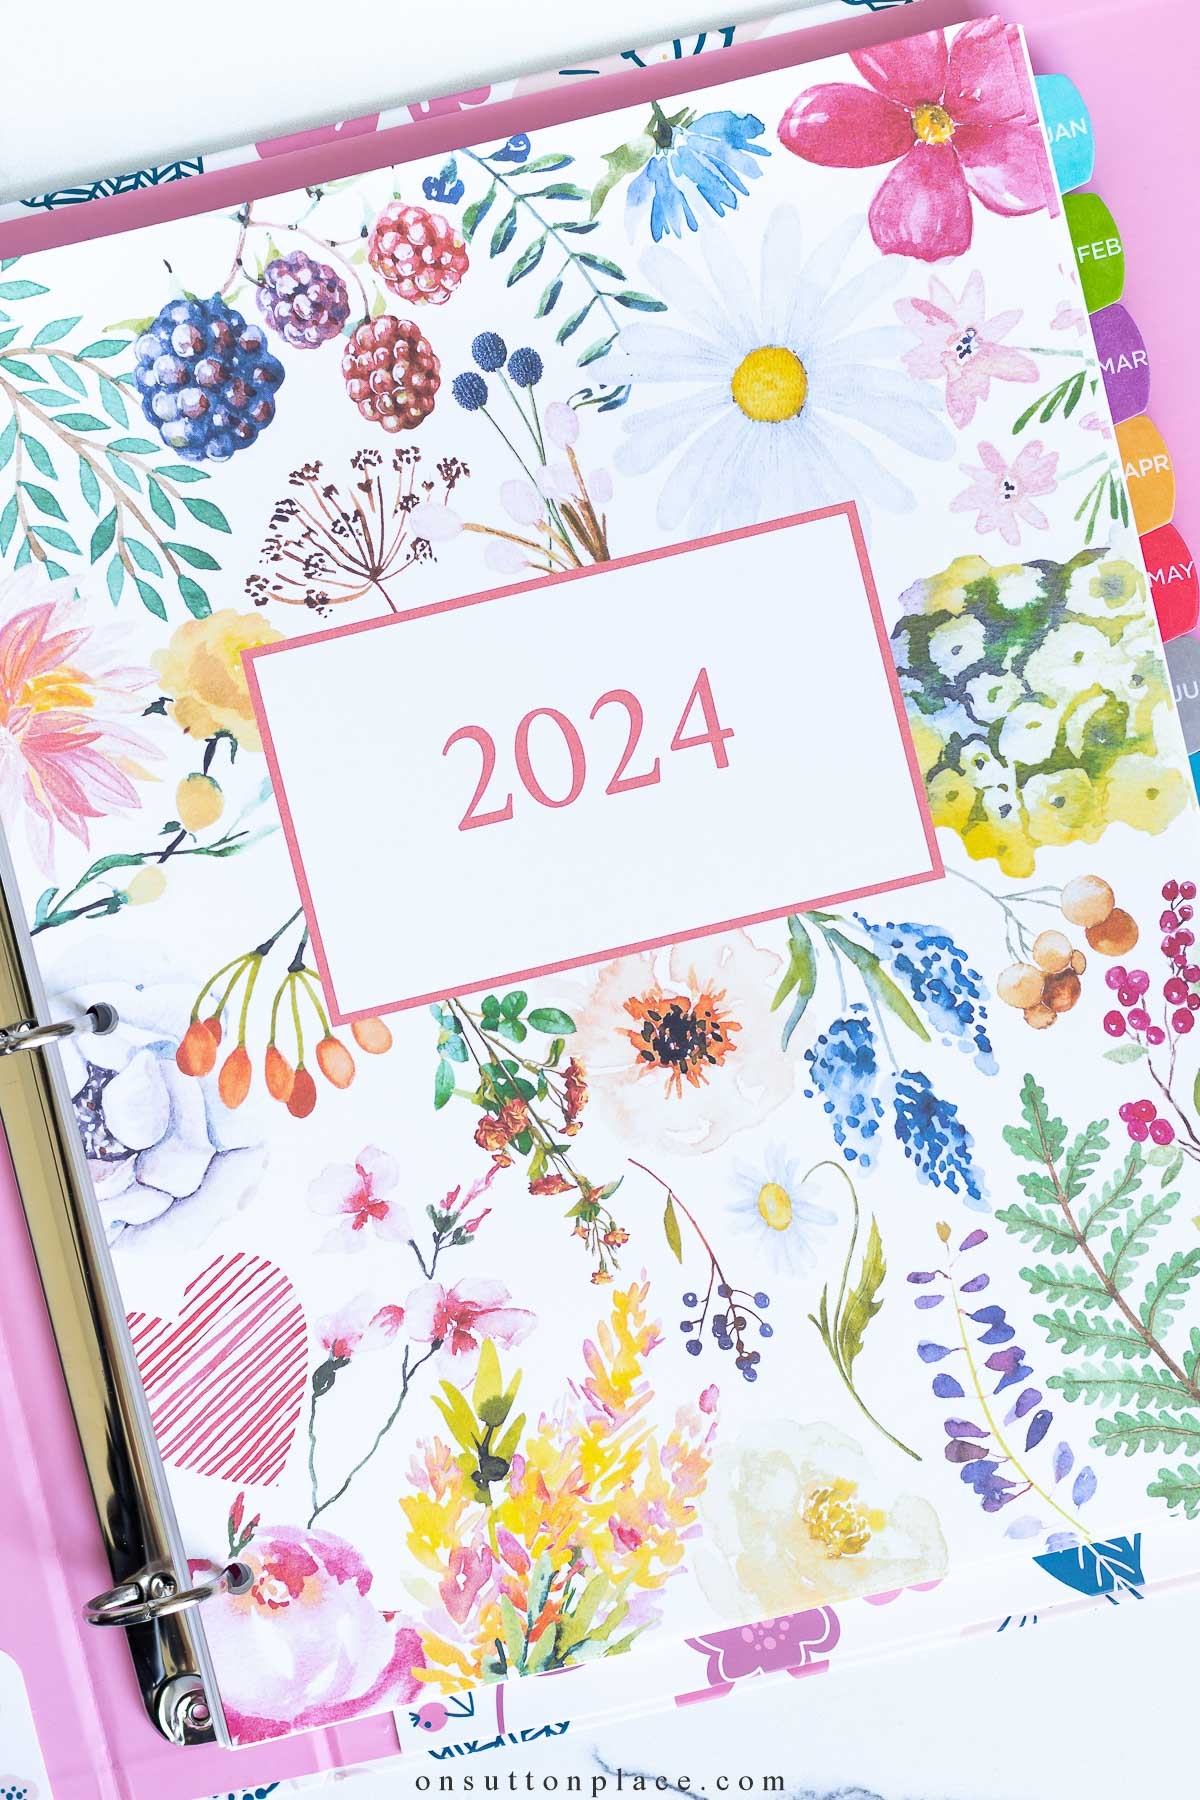 2024 Free Printable Calendar With Planner Pages - On Sutton Place intended for Free Printable Calendar 2024 Colorful